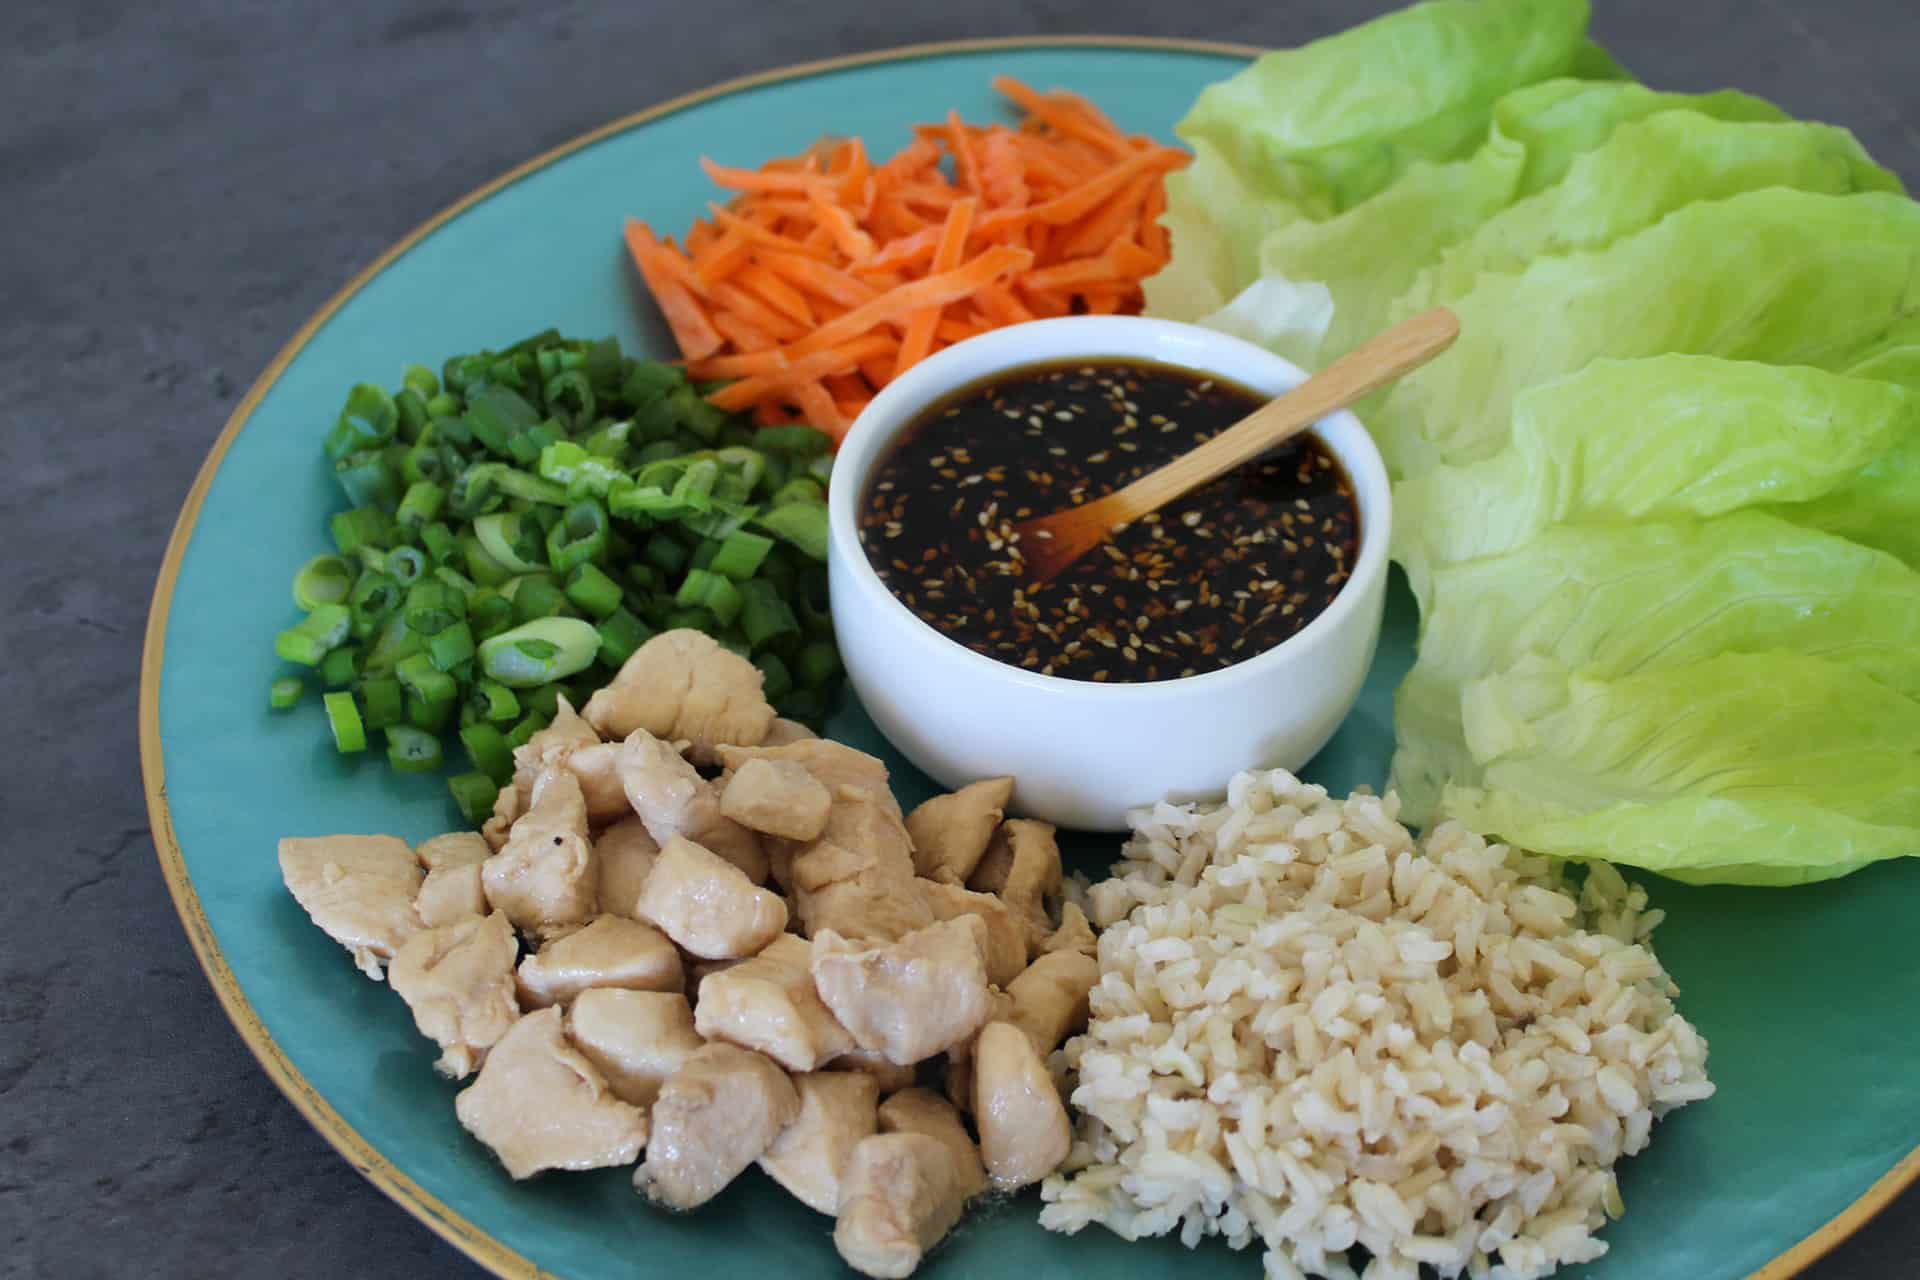 A platter of deconstructed Asian chicken lettuce wraps for serving at the table